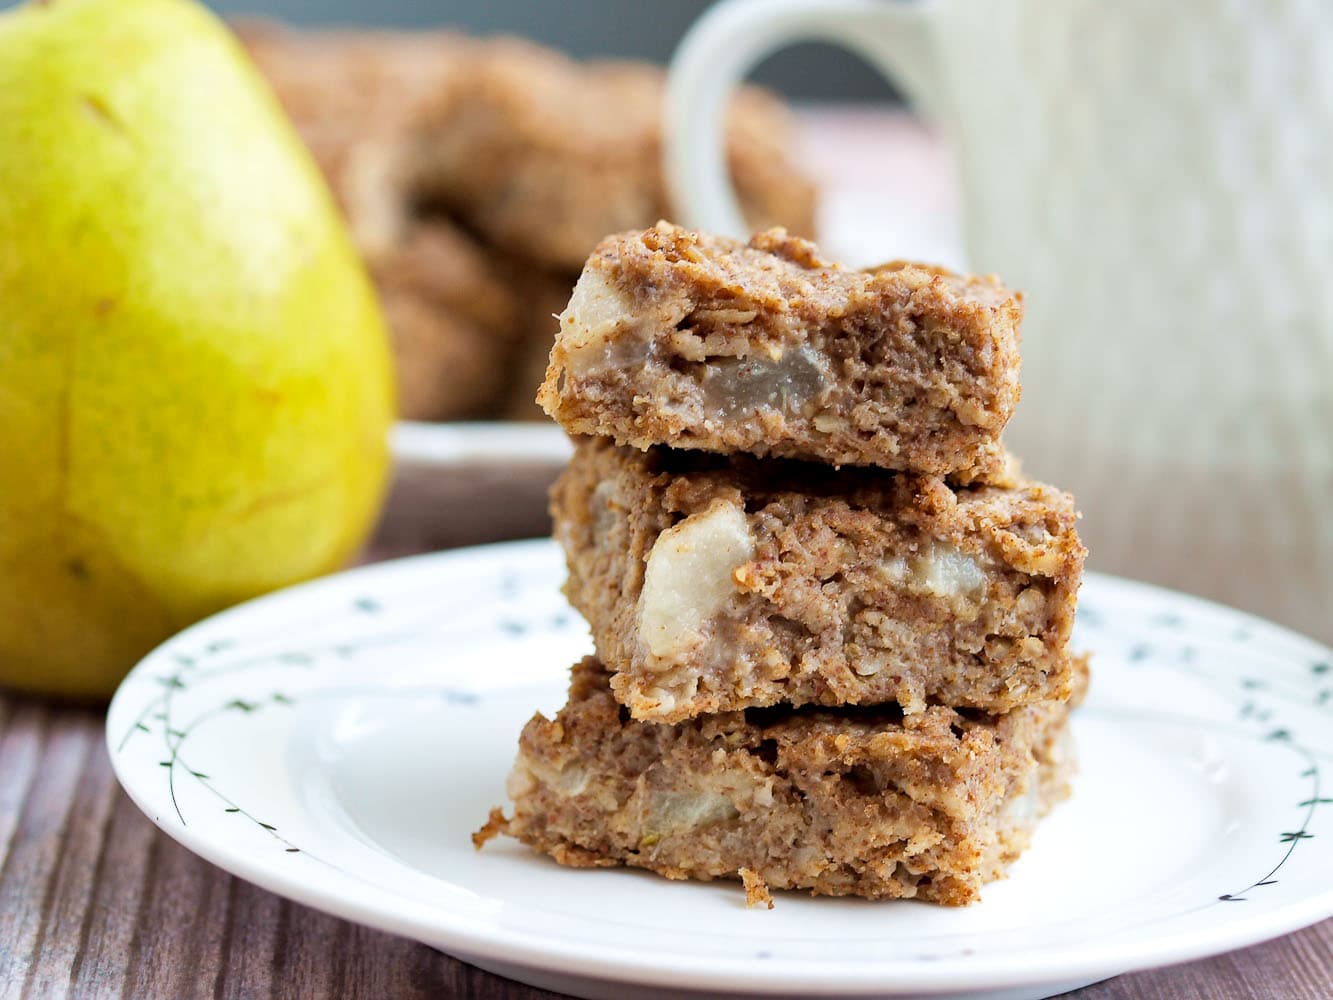 Fruit sweetened pear oatmeal bars recipe. These Pear Oatmeal Bars are made with NO added sugar, are vegan, and gluten-free. They make a perfect healthy breakfast or snack! Great for kids and toddlers, too.